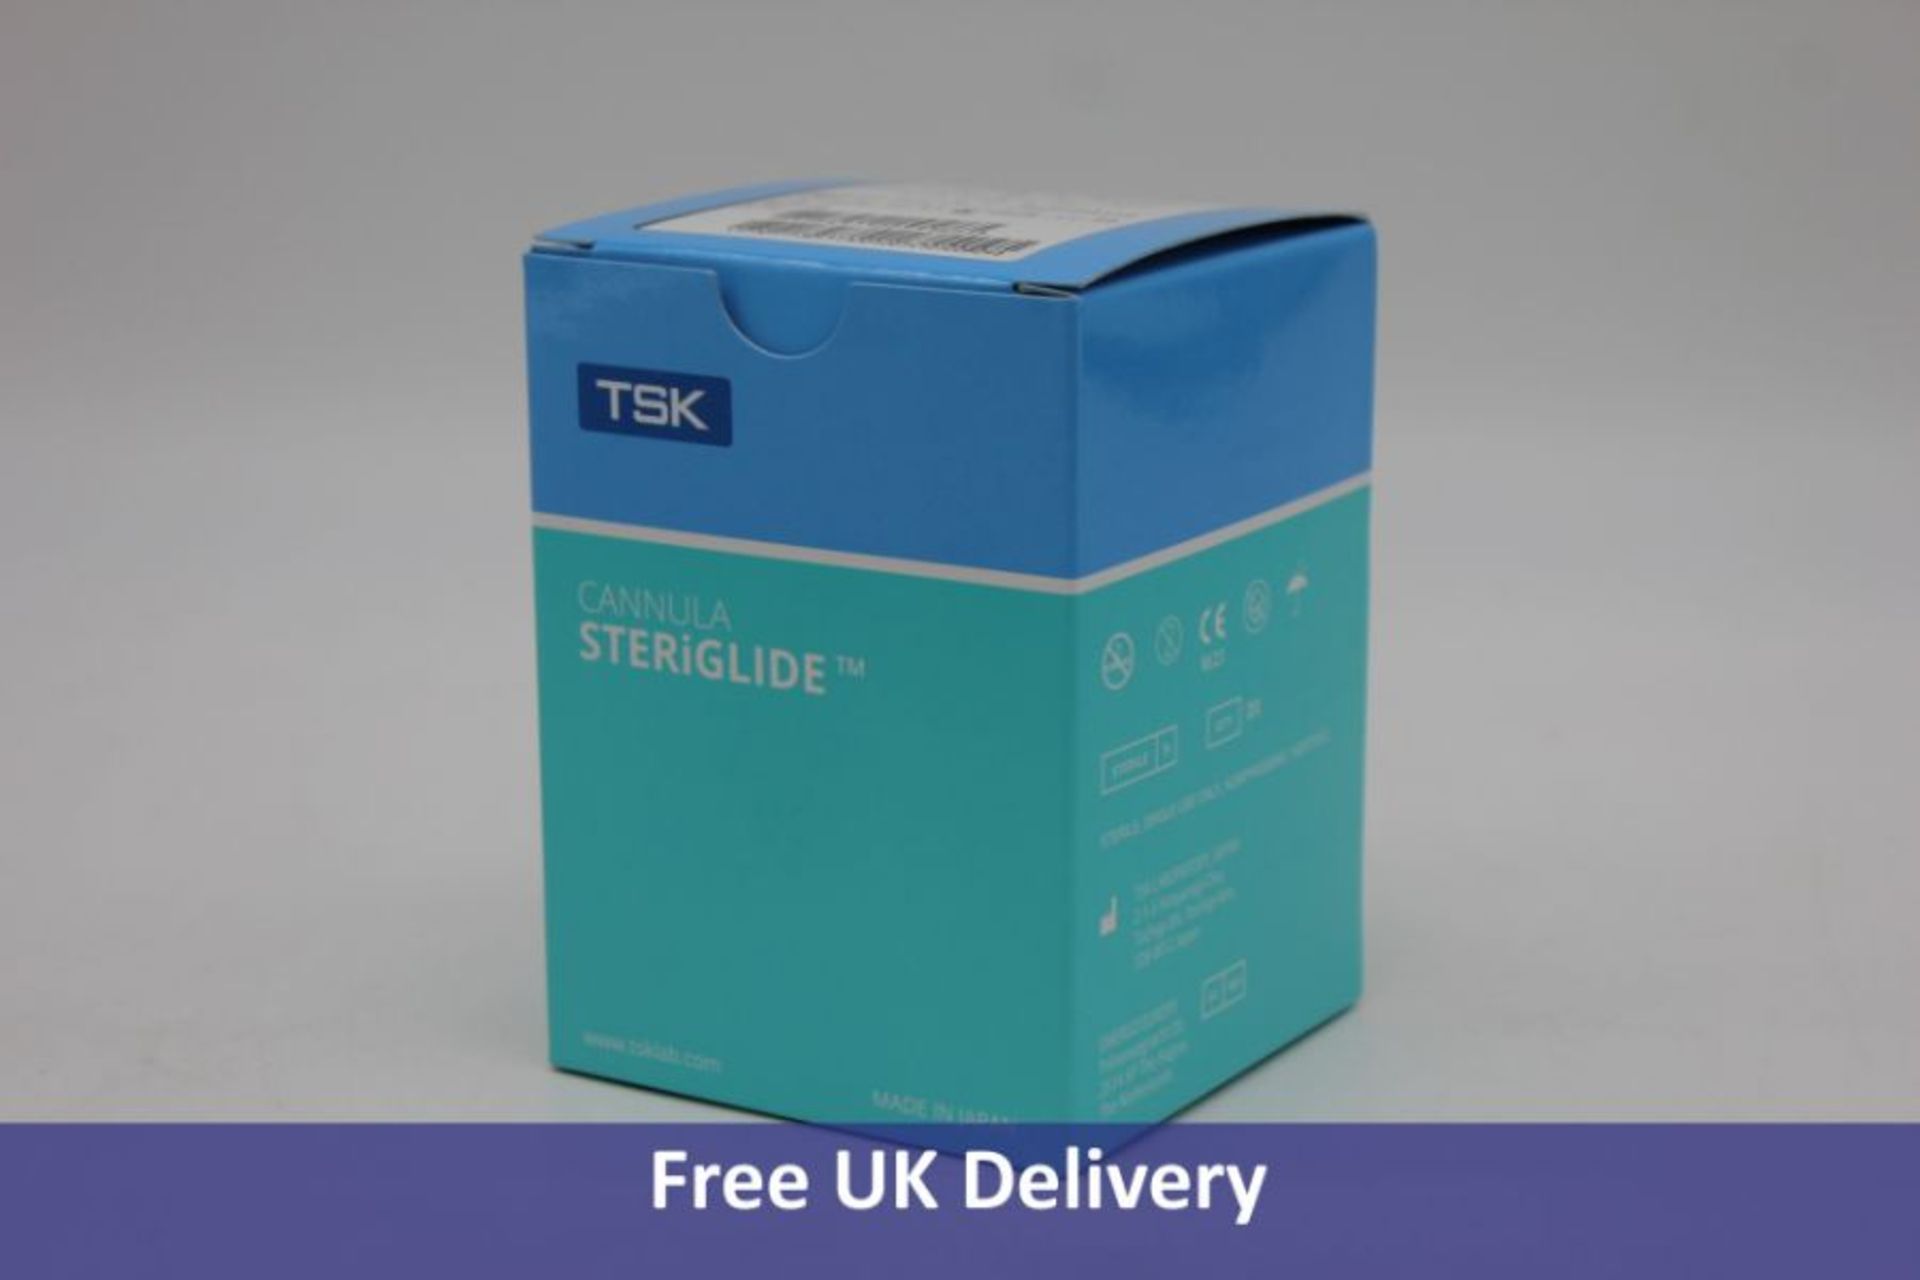 Steriglide Cannula Healthcare Products to include 1x Size 22G X 2", LOT 208046, Expiry Date 2025-11- - Image 2 of 3